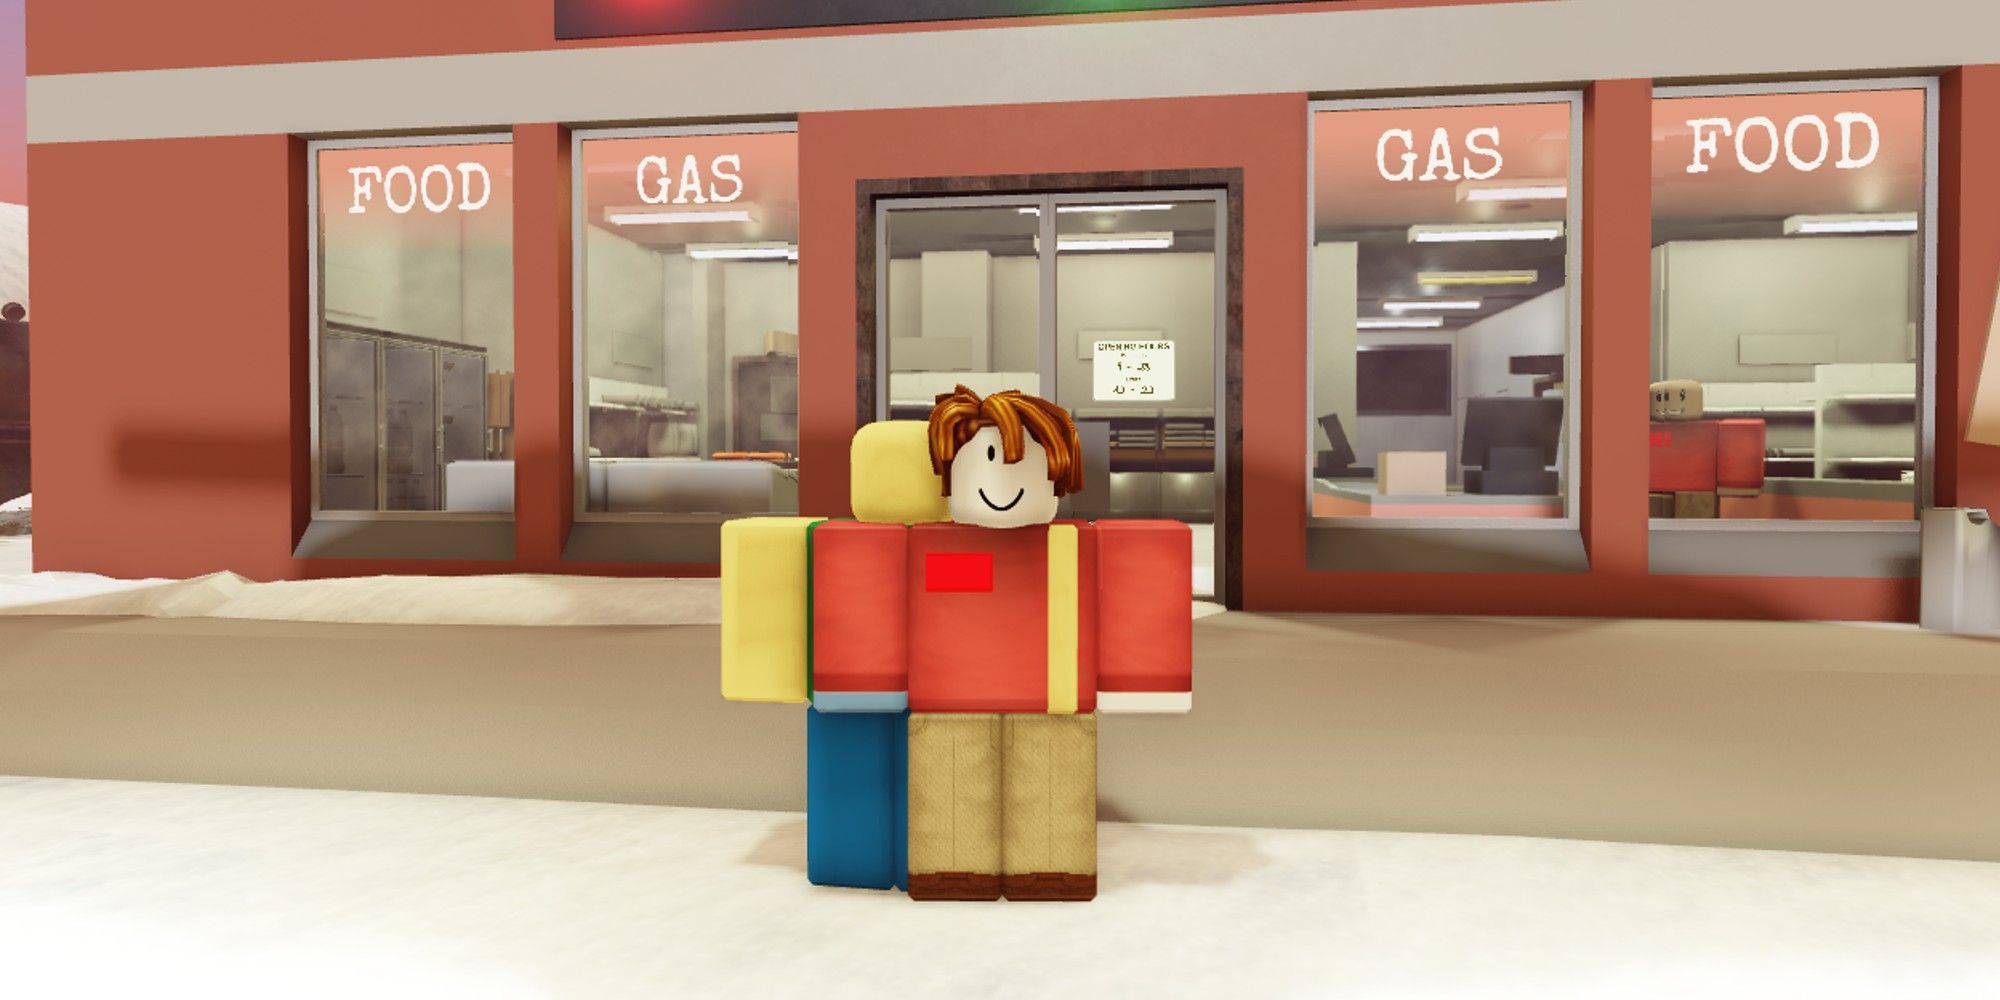 Gas Station Simulator Character Outside Their Gas Station